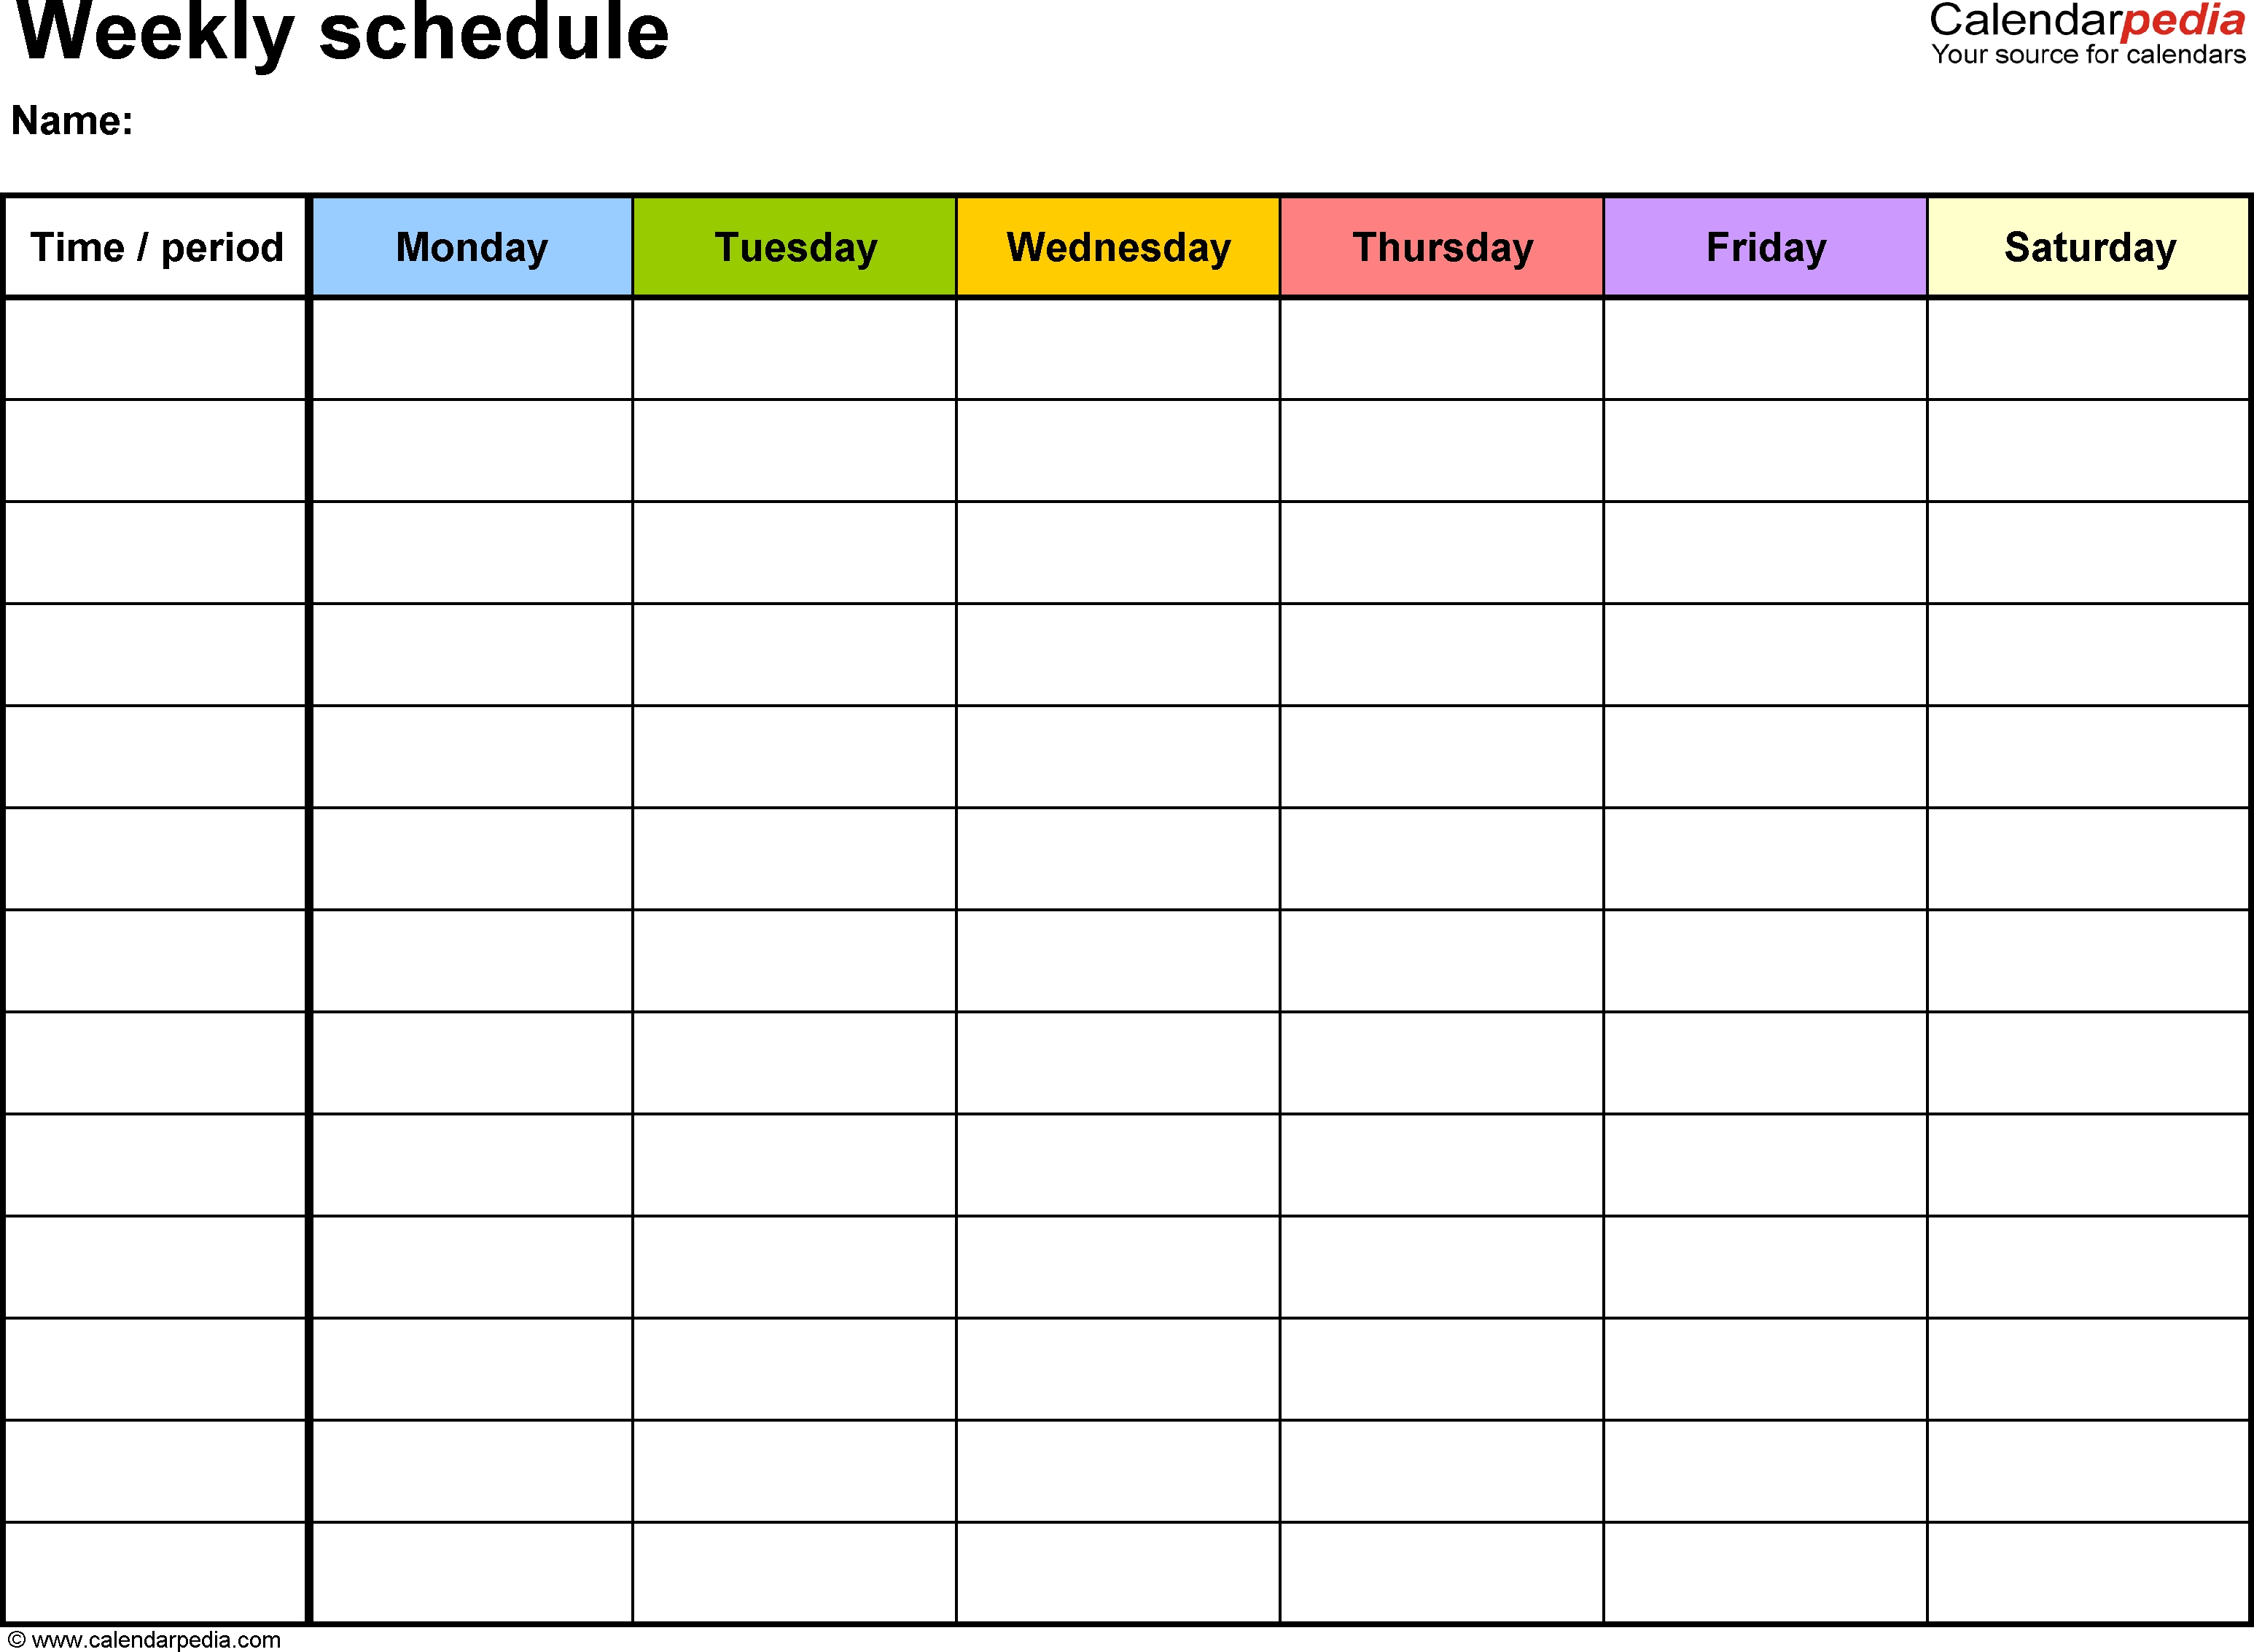 Free Weekly Schedule Templates For Word - 18 Templates-5 Day Week Calendar Templates